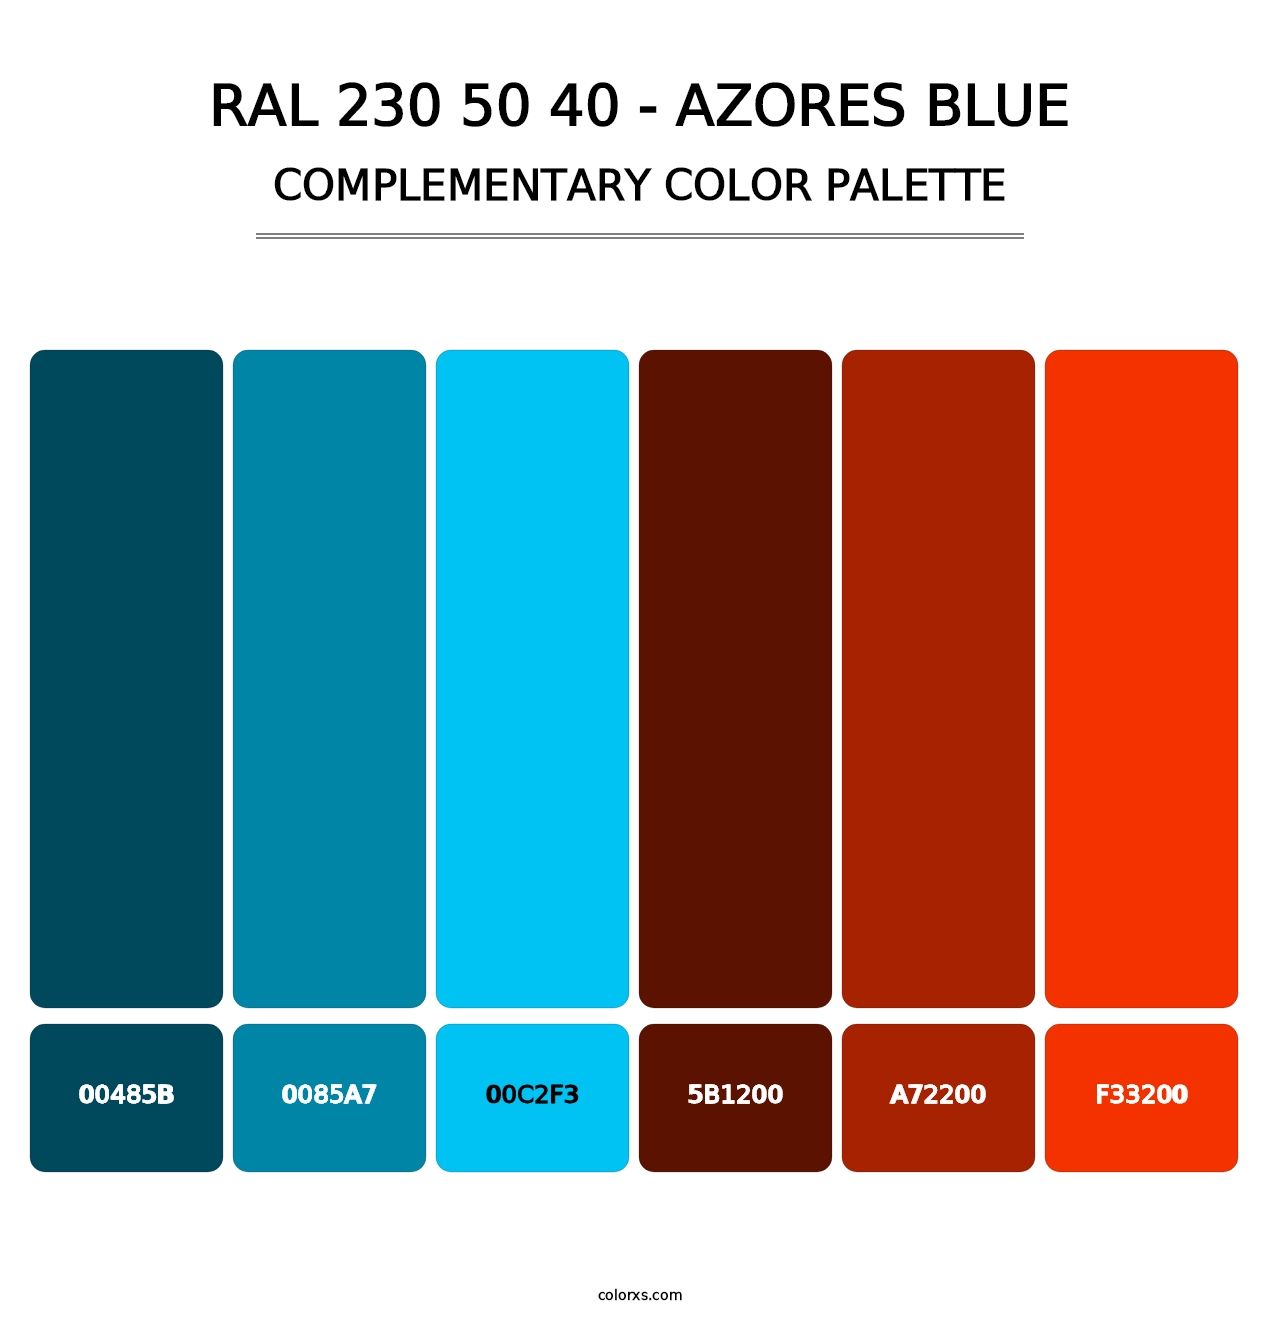 RAL 230 50 40 - Azores Blue - Complementary Color Palette